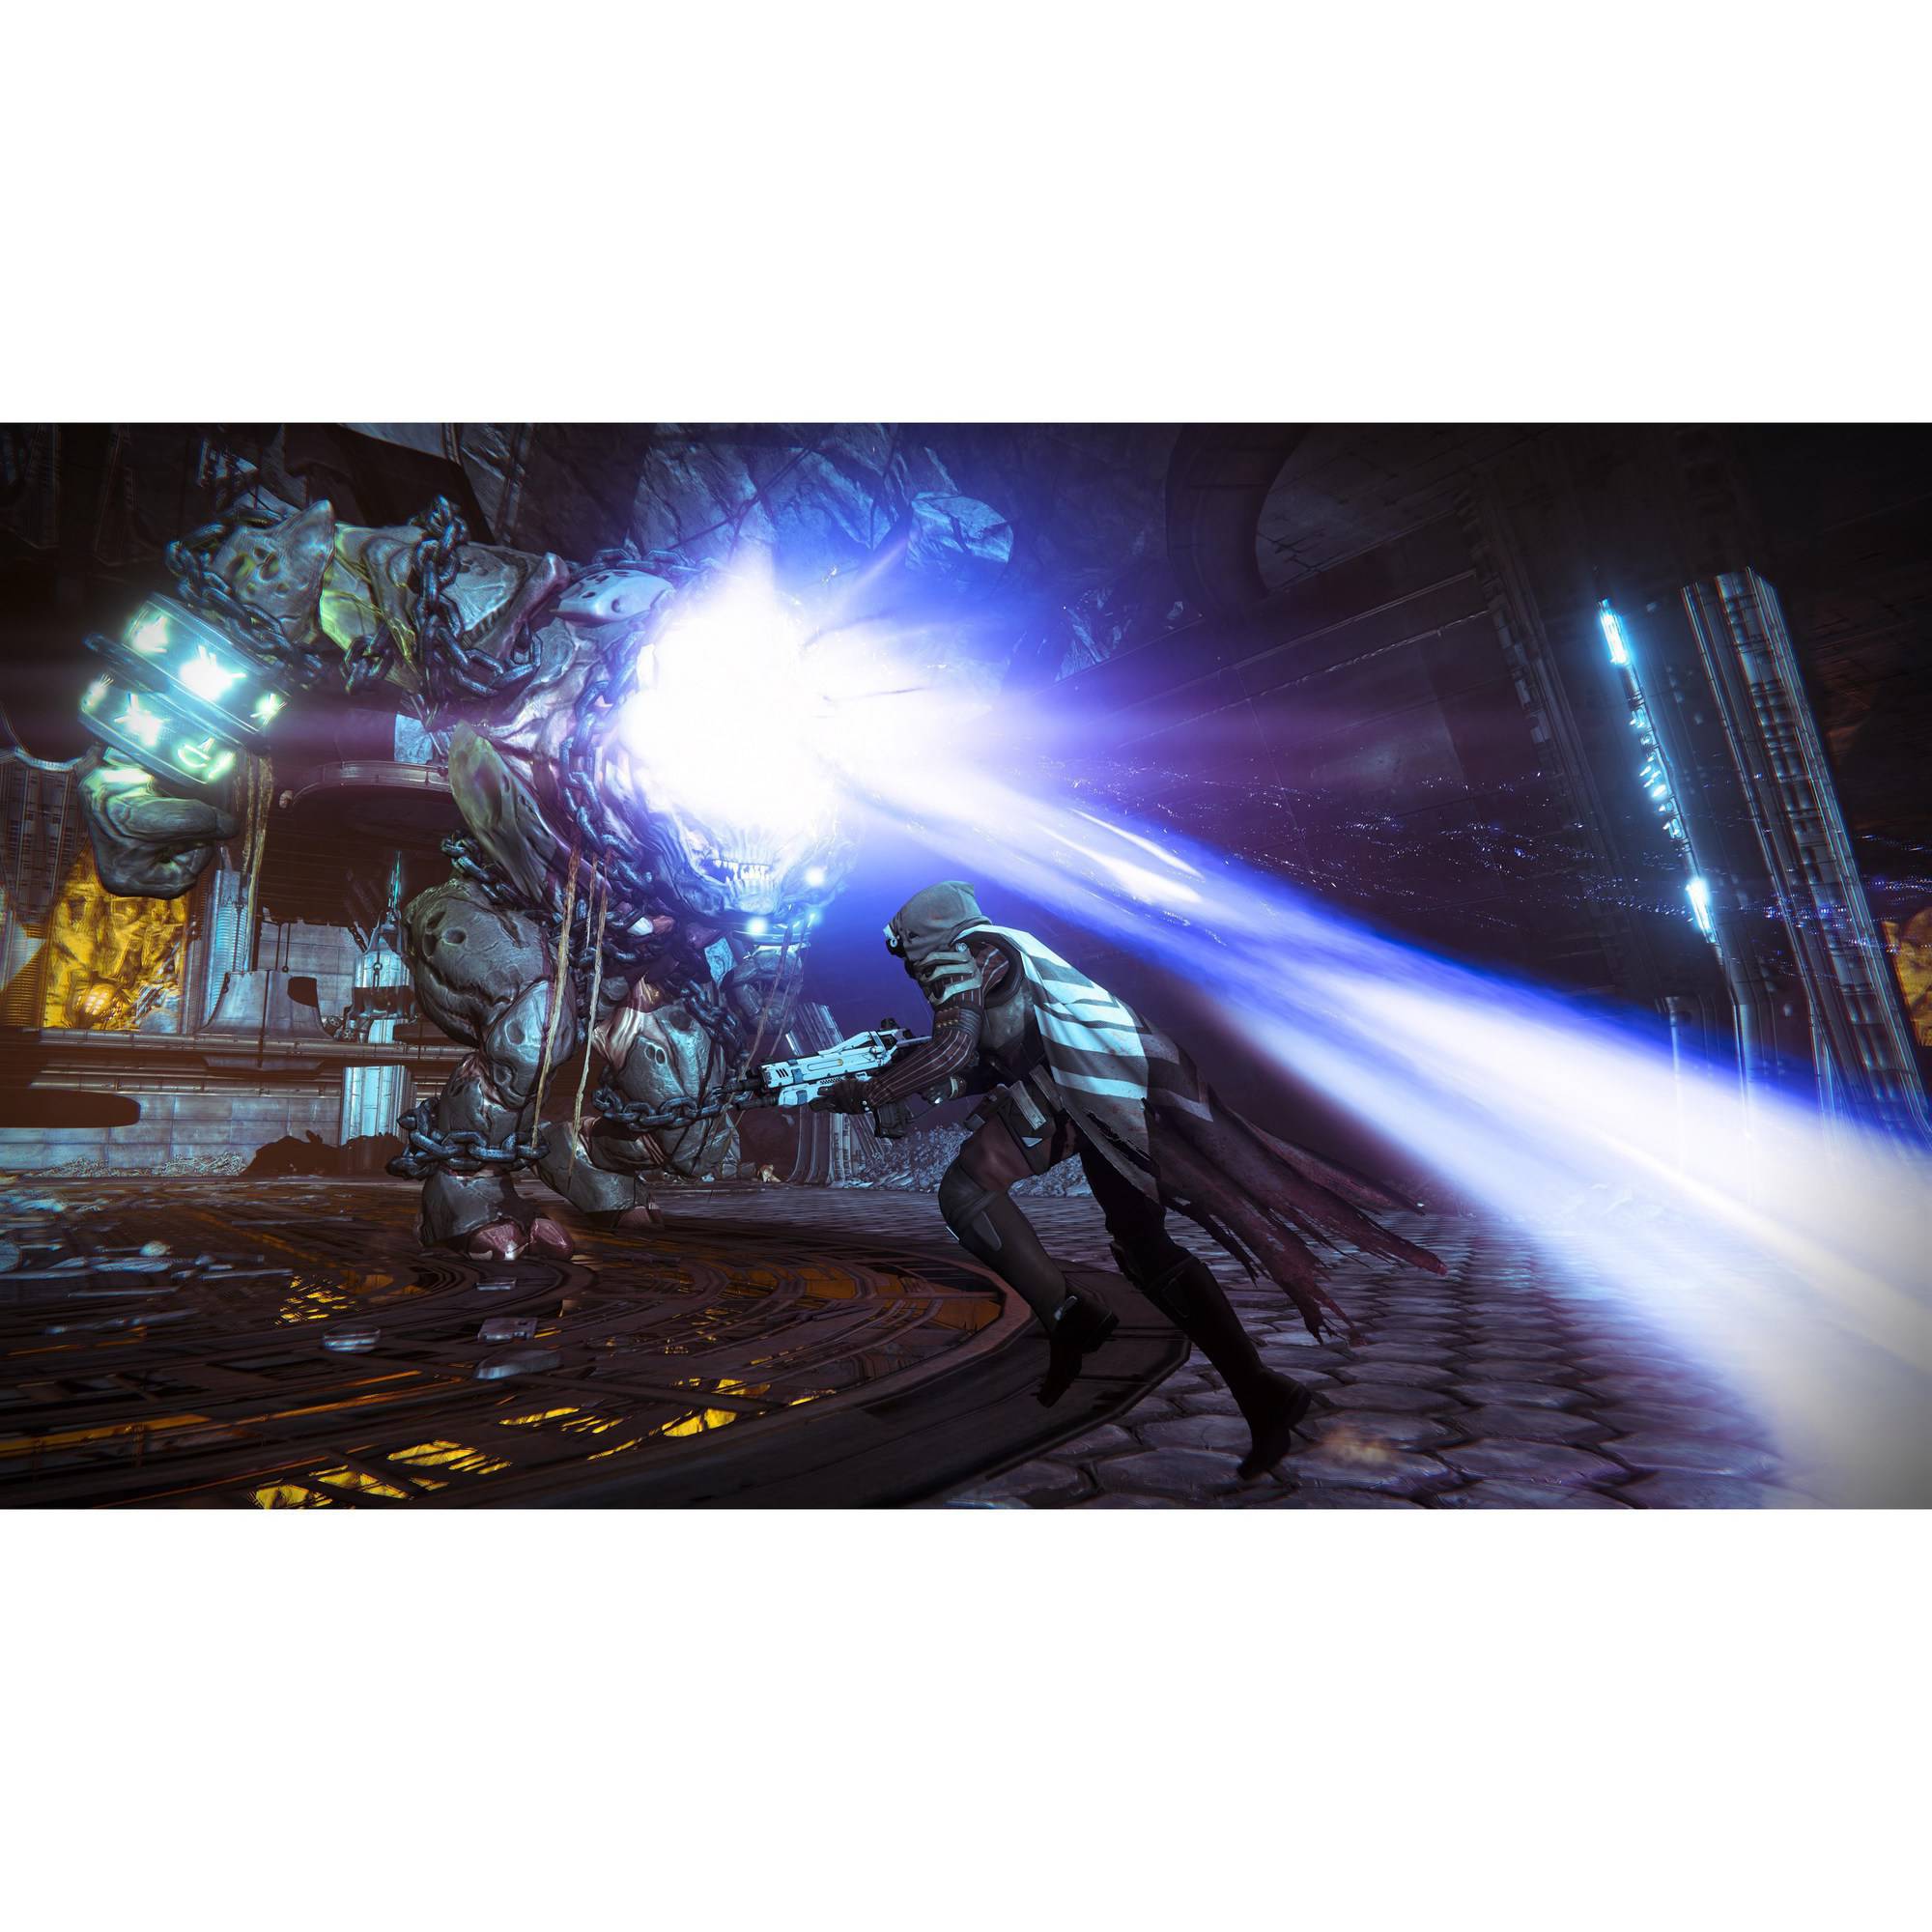 Destiny: The Taken King Legendary Edition, Activision, PlayStation 4, 047875874428 - image 24 of 31